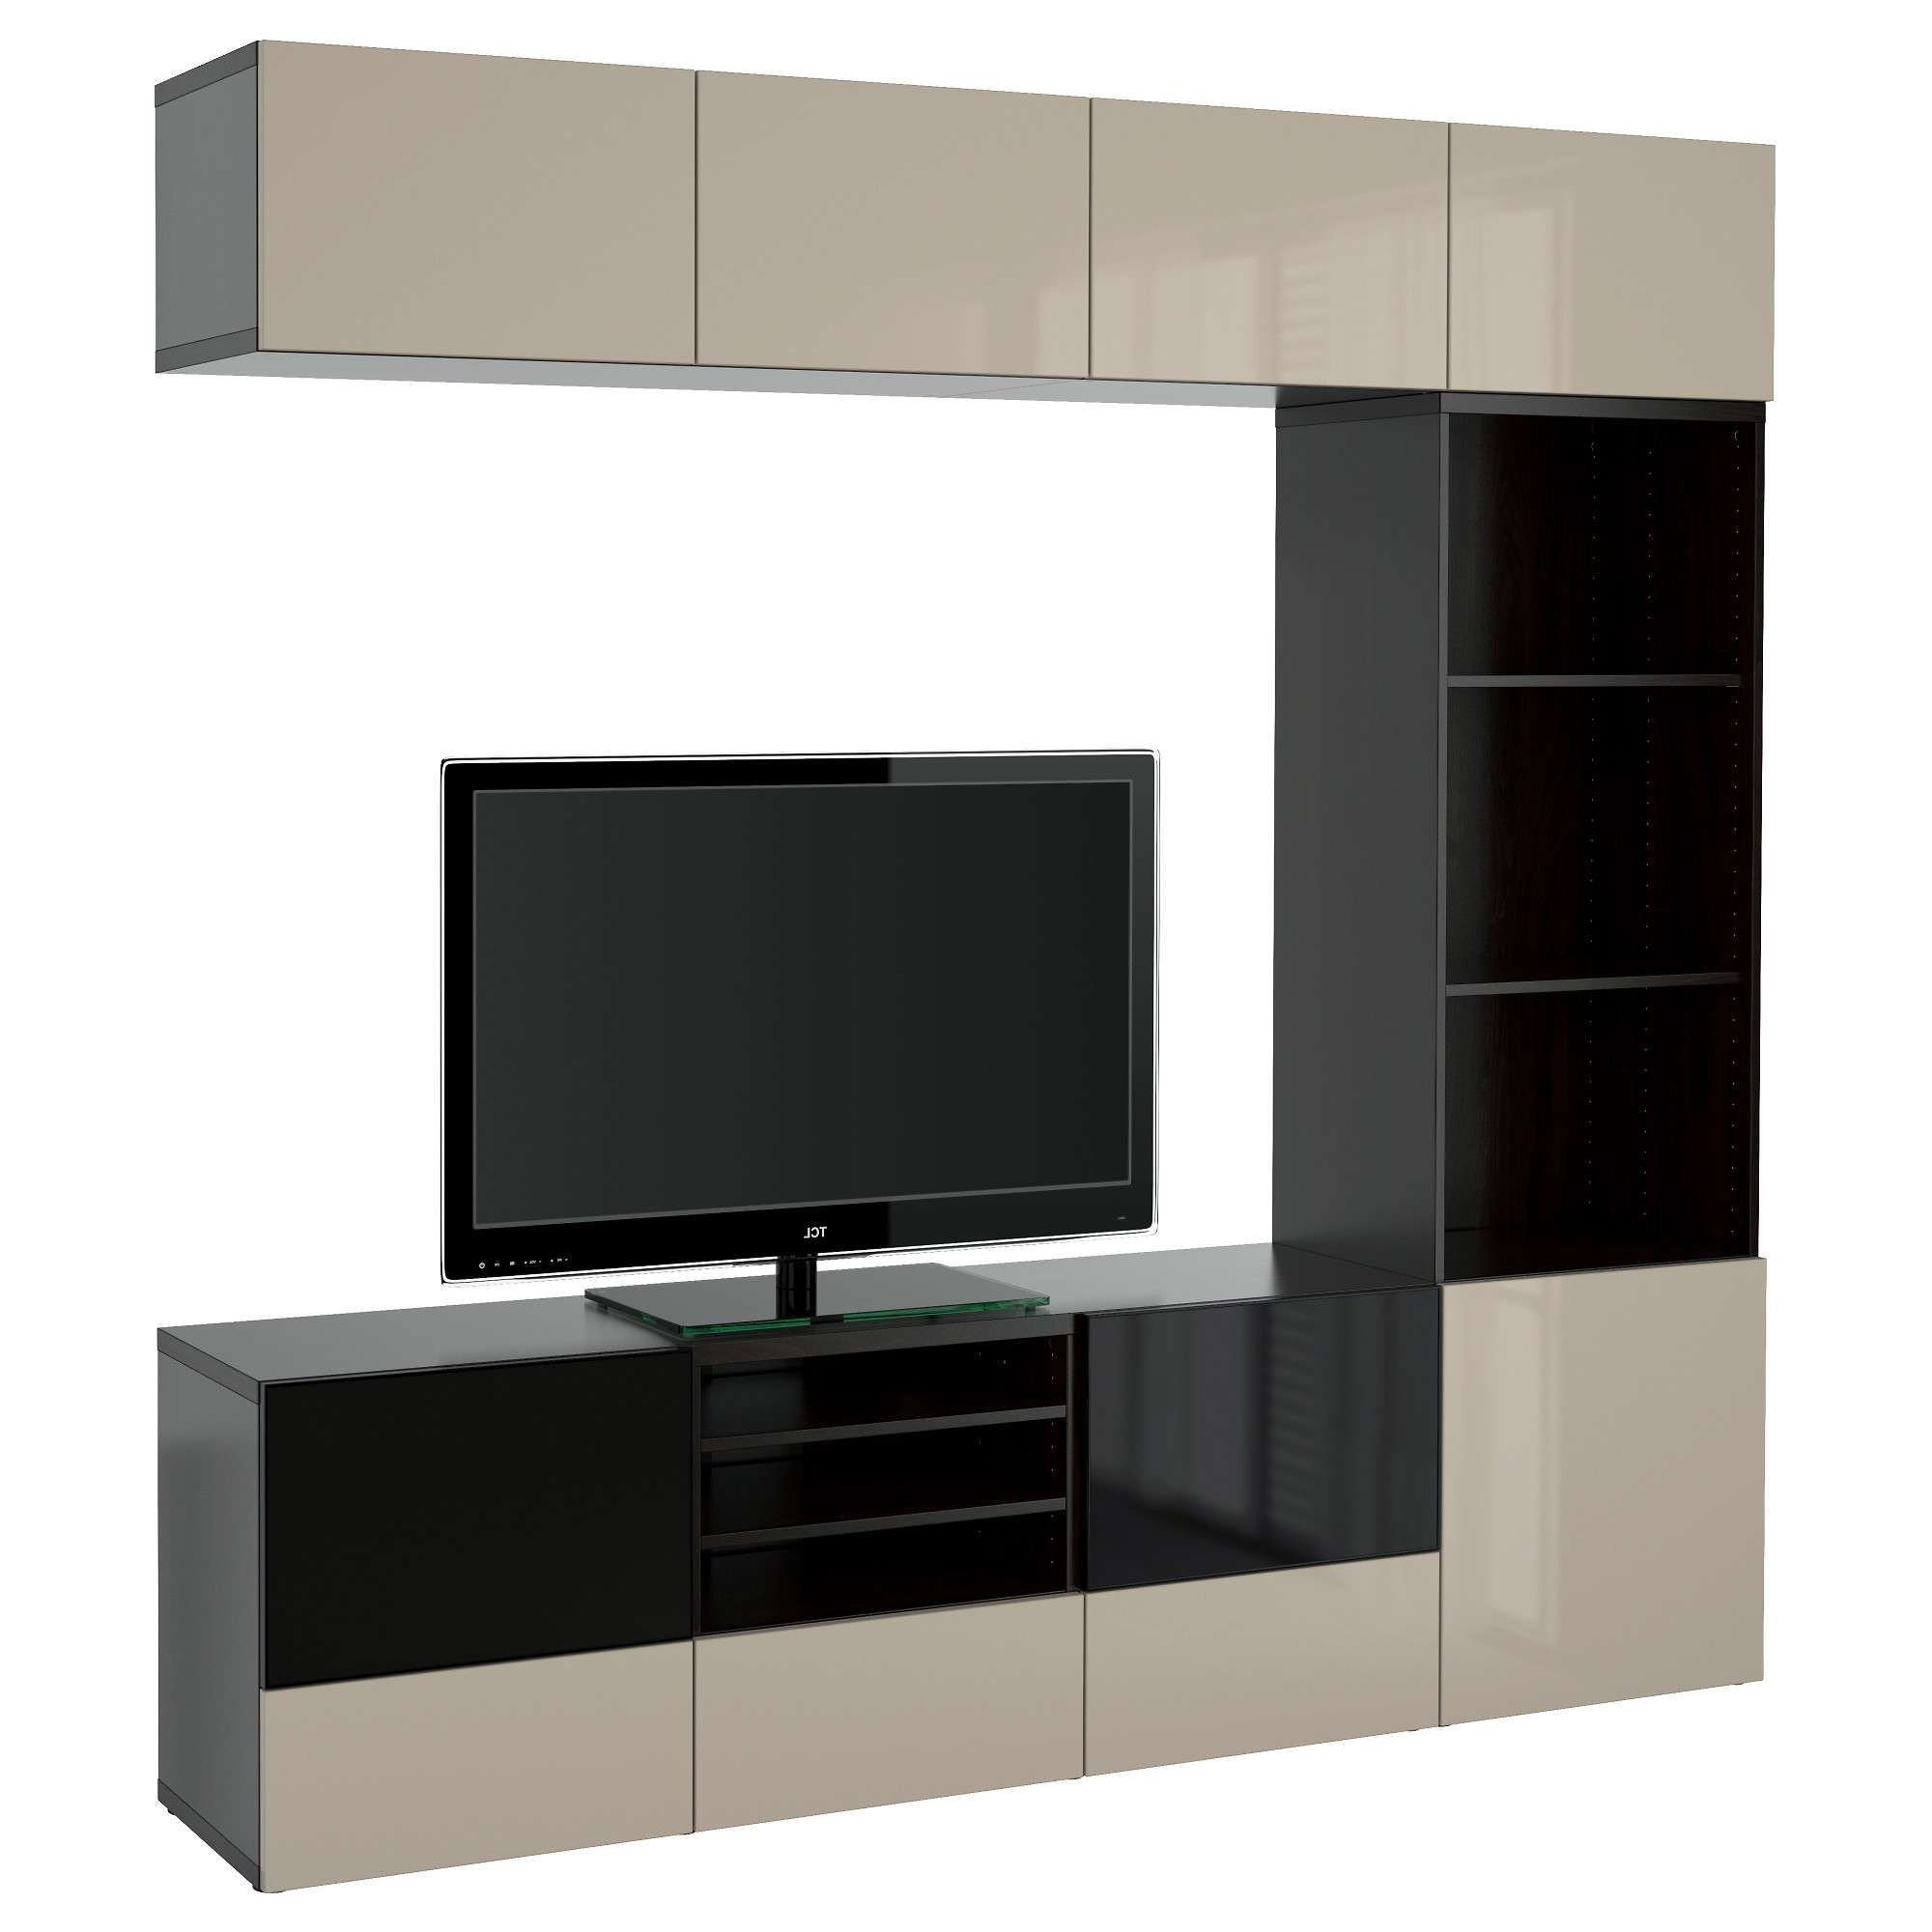 Entertainment Centers At Ikea Storage Cabinet Besta Tv Stand Shelf Intended For Tv Cabinets With Storage (View 4 of 20)